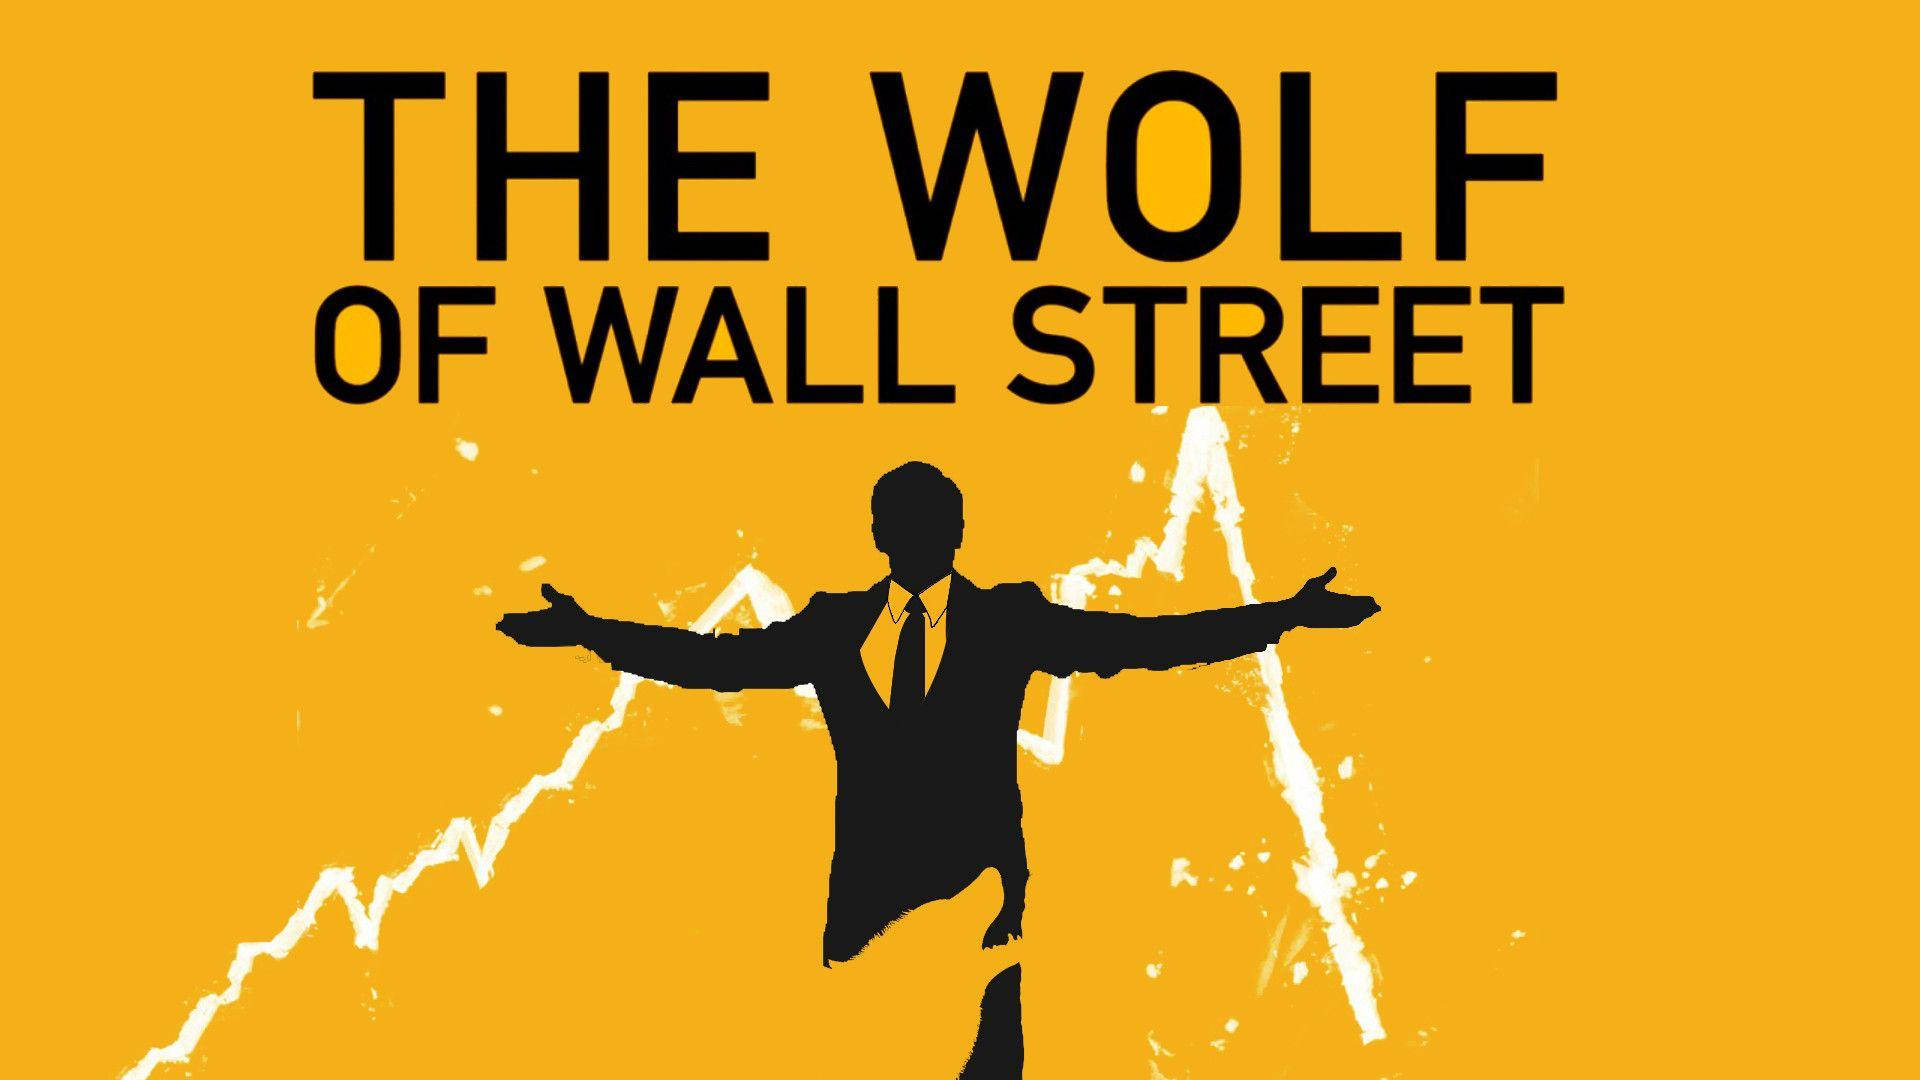 Wolf Of Wall Street Poster In Yellow Background